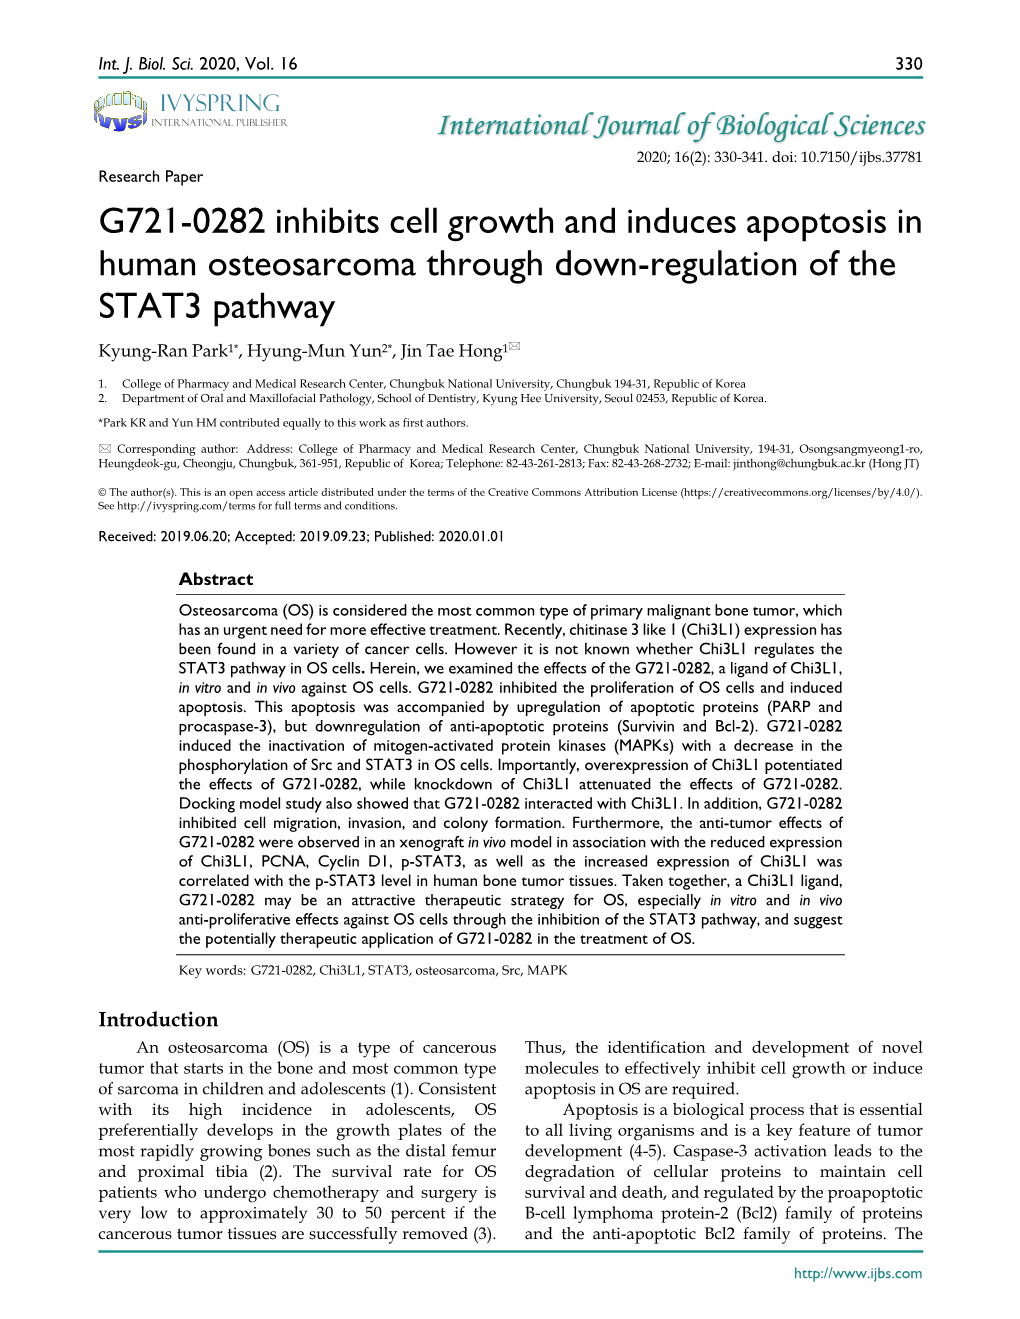 G721-0282 Inhibits Cell Growth and Induces Apoptosis in Human